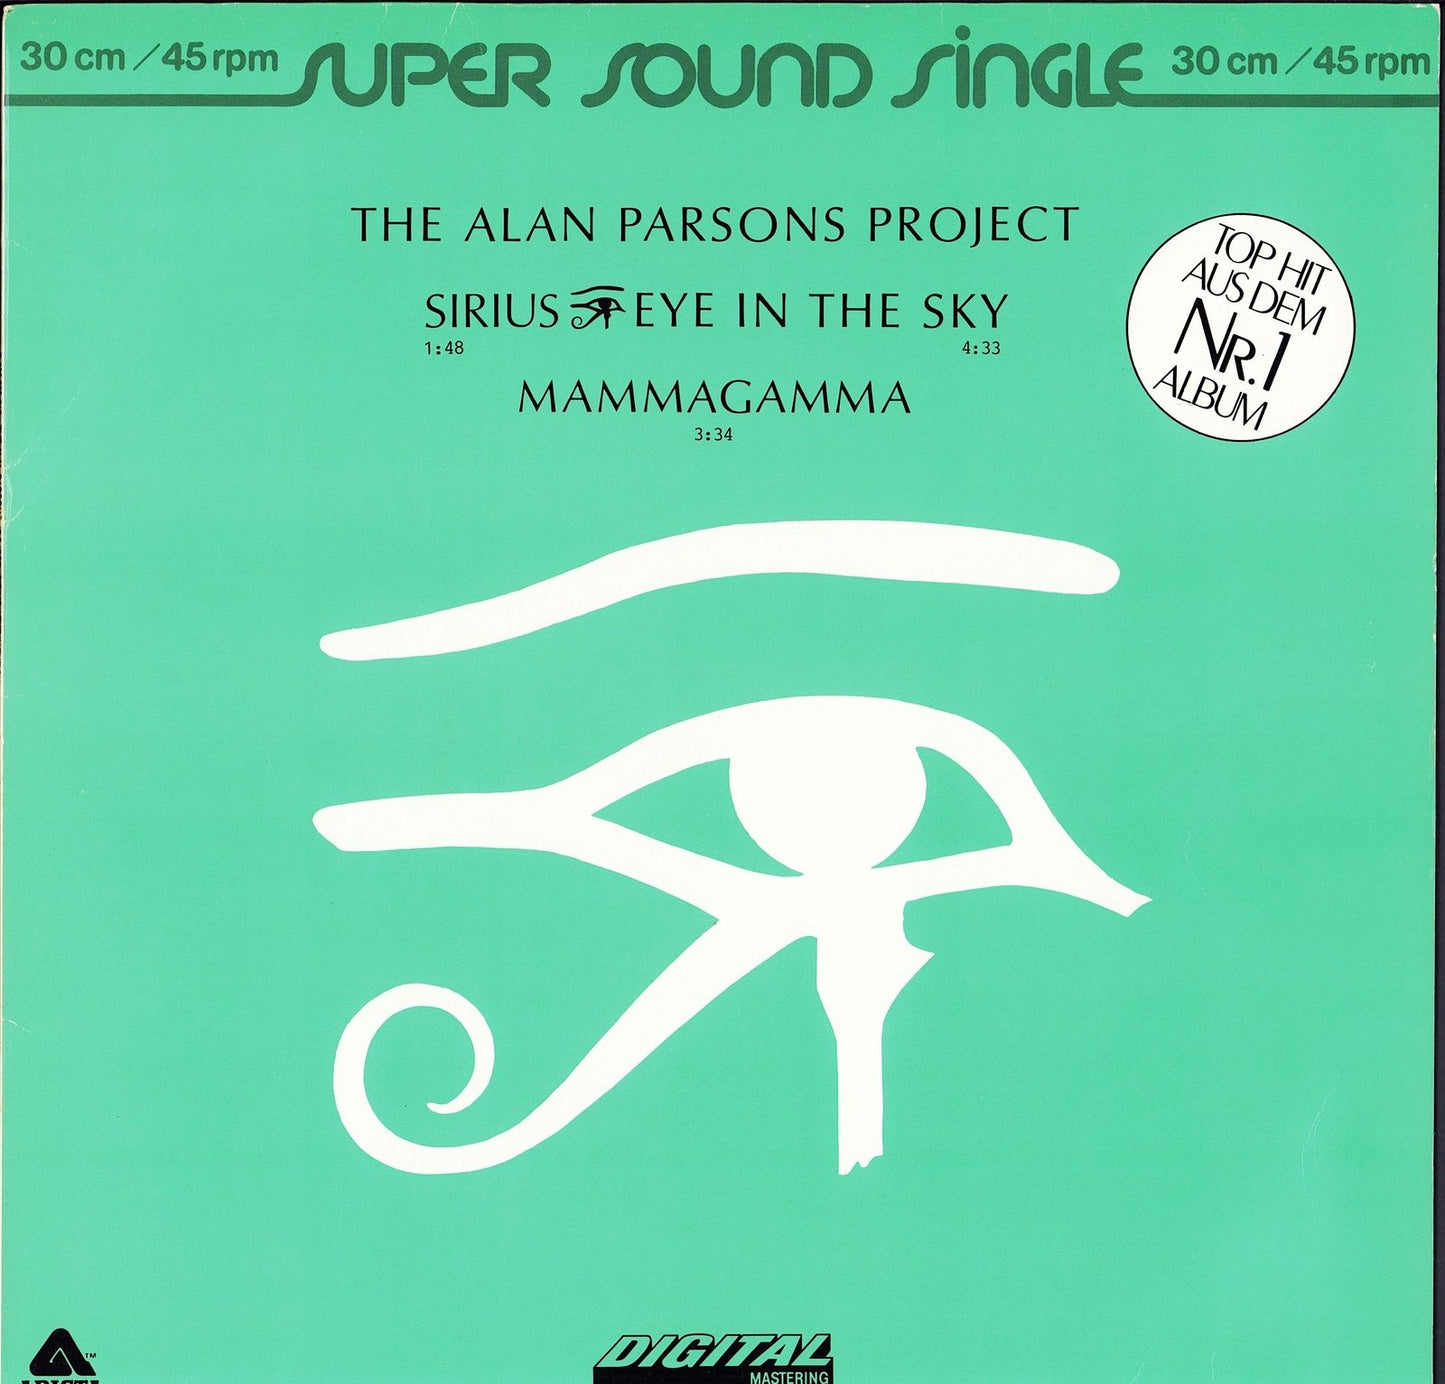 The Alan Parsons Project ‎- Sirius - Eye In The Sky / Mammagamma (Vinyl 12")